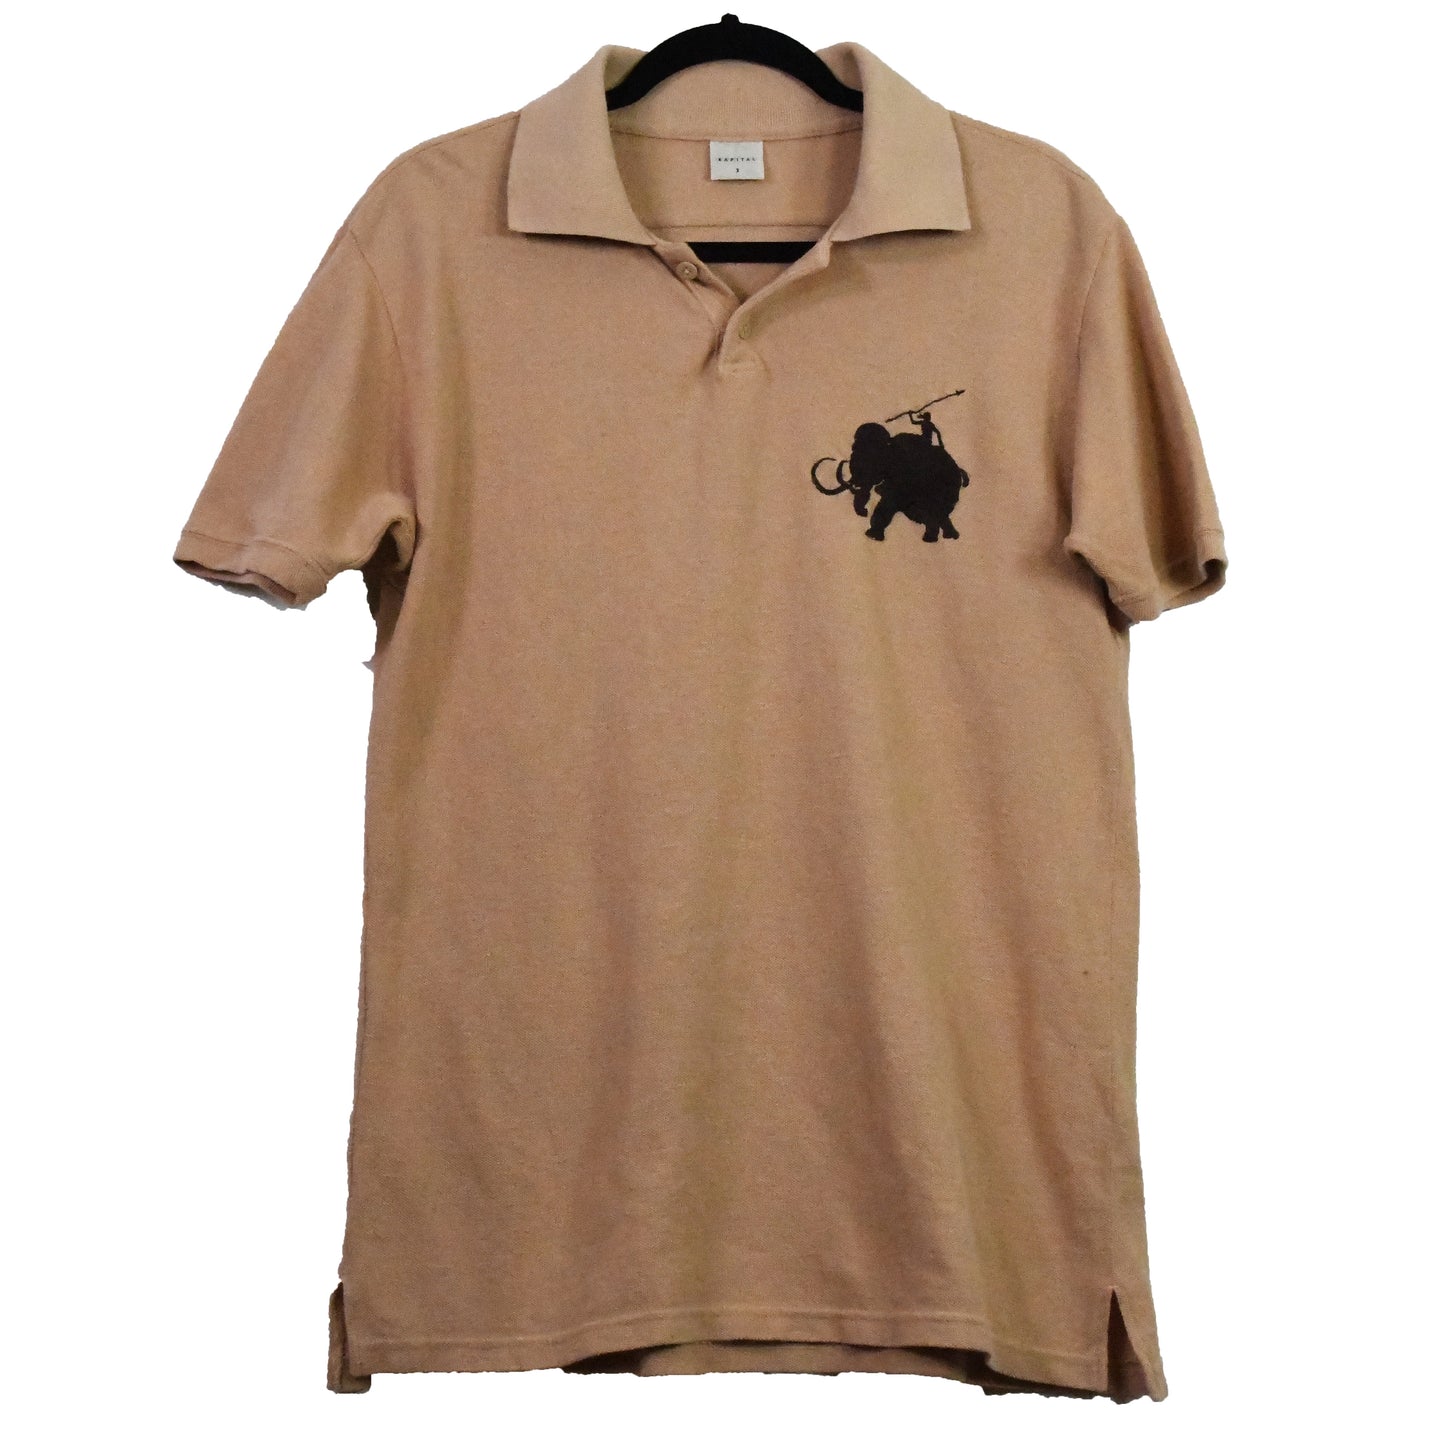 Kapital peach “Polo Spoof” wooly mammoth logo collared shirt 3/large